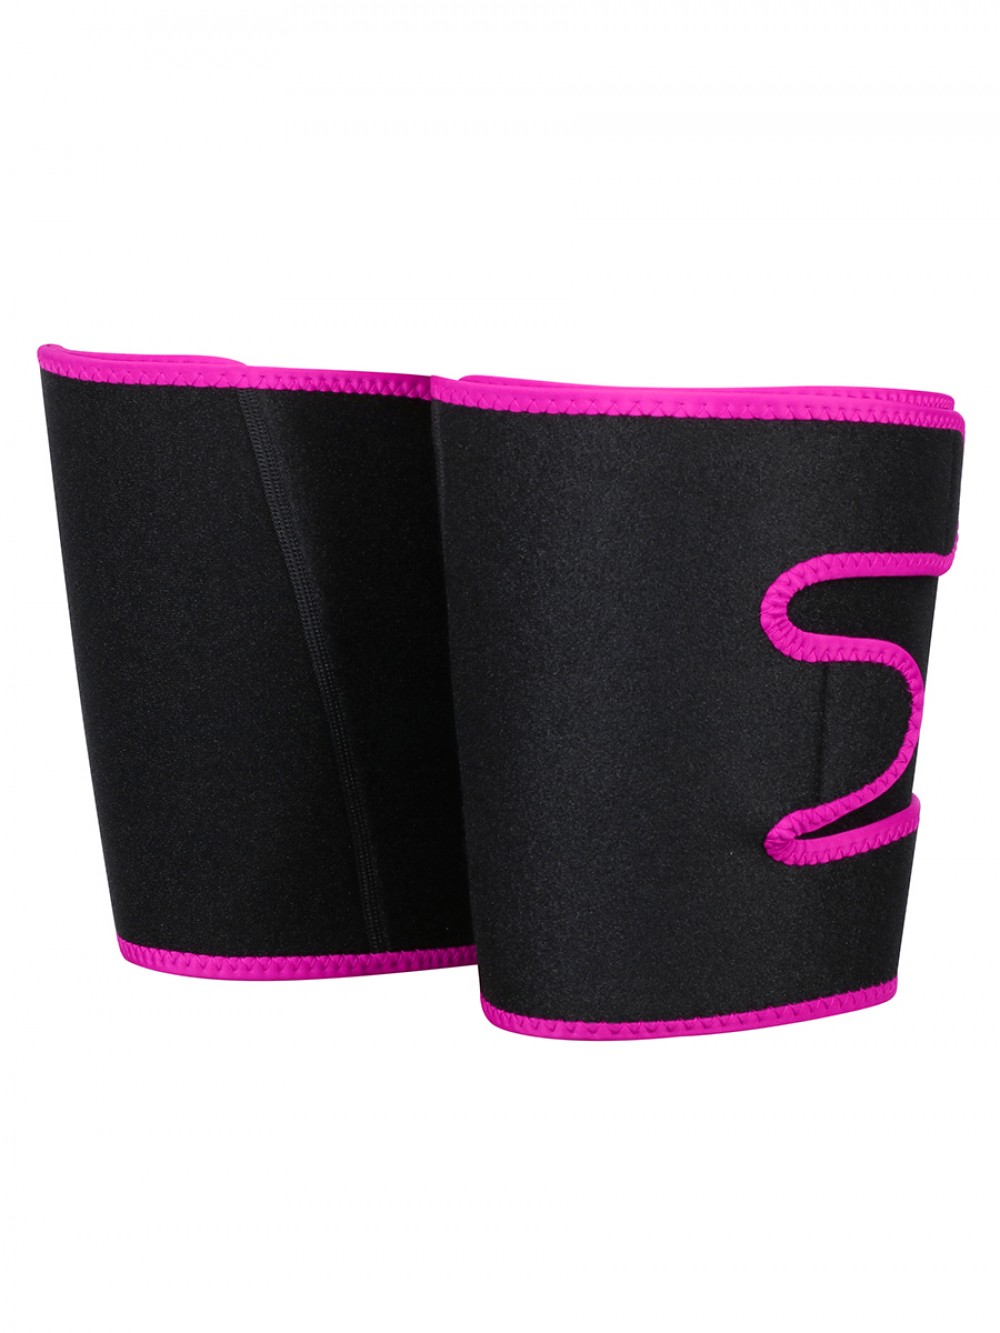 Sophisticated Rose Red Neoprene 2 Pcs Thigh Trimmers Adjust Bandage